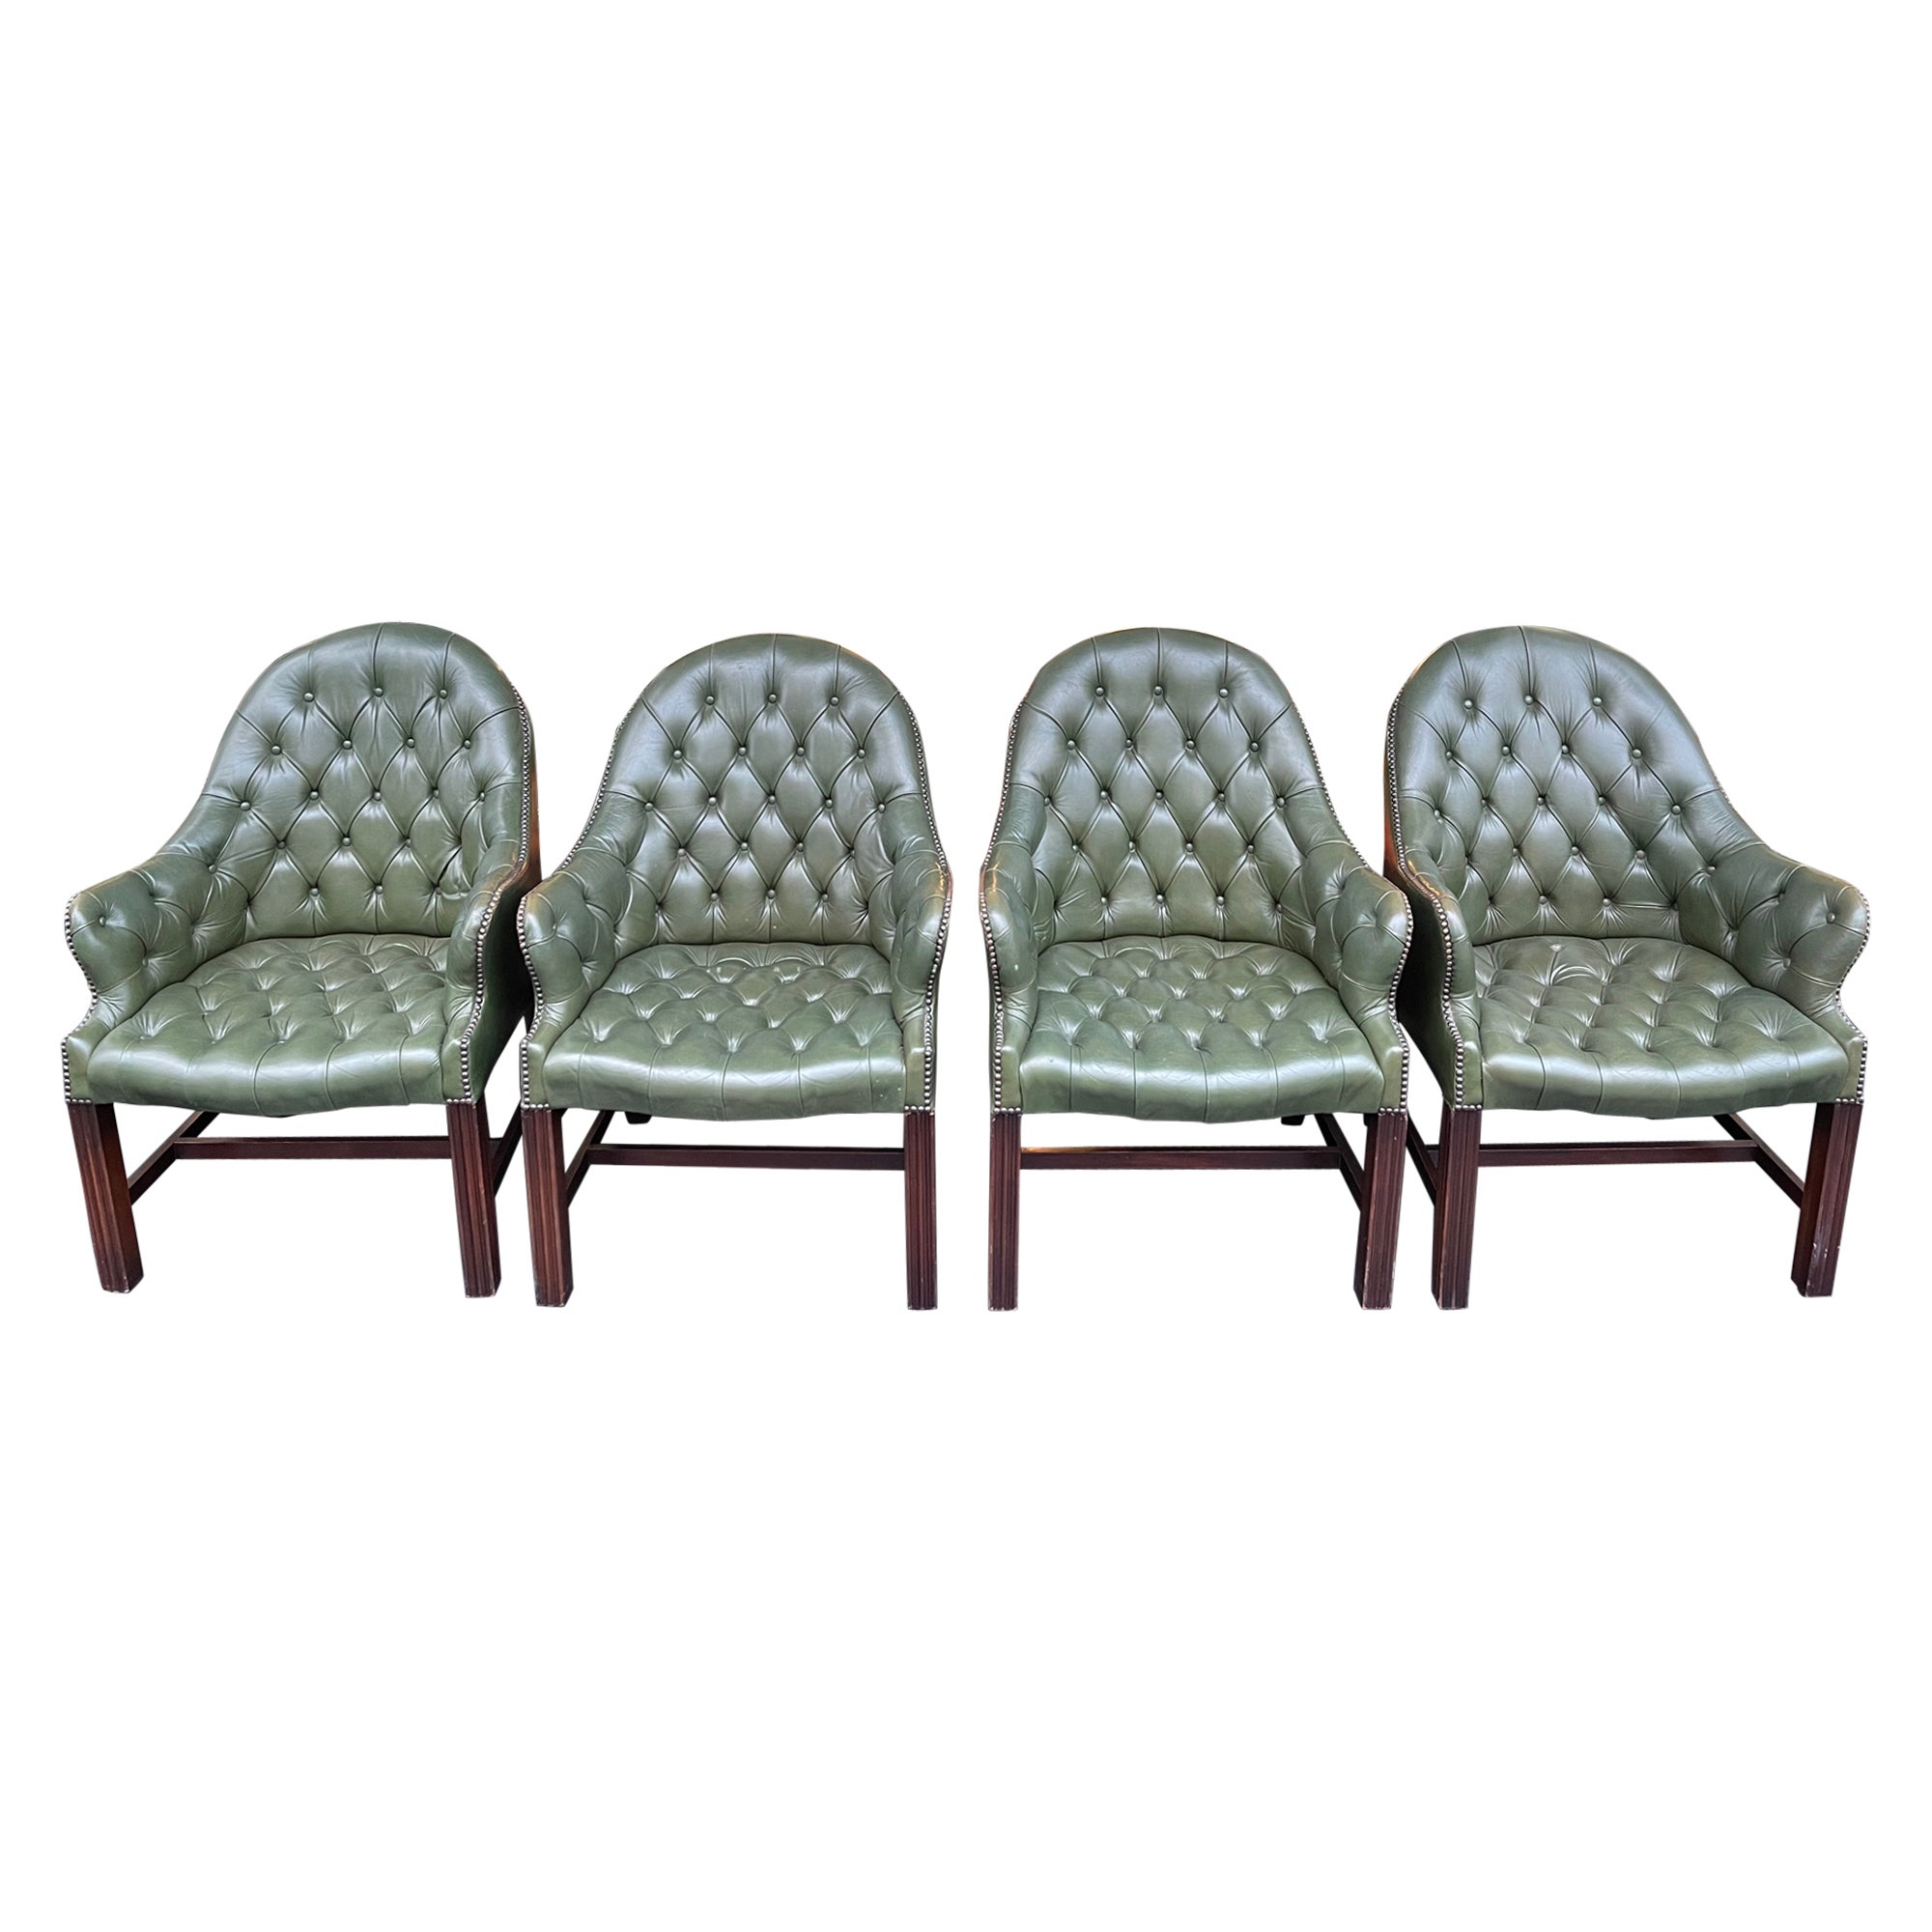 Set of 4 English Chesterfield Lounge Chairs / Armchairs, WADE , 20th Century